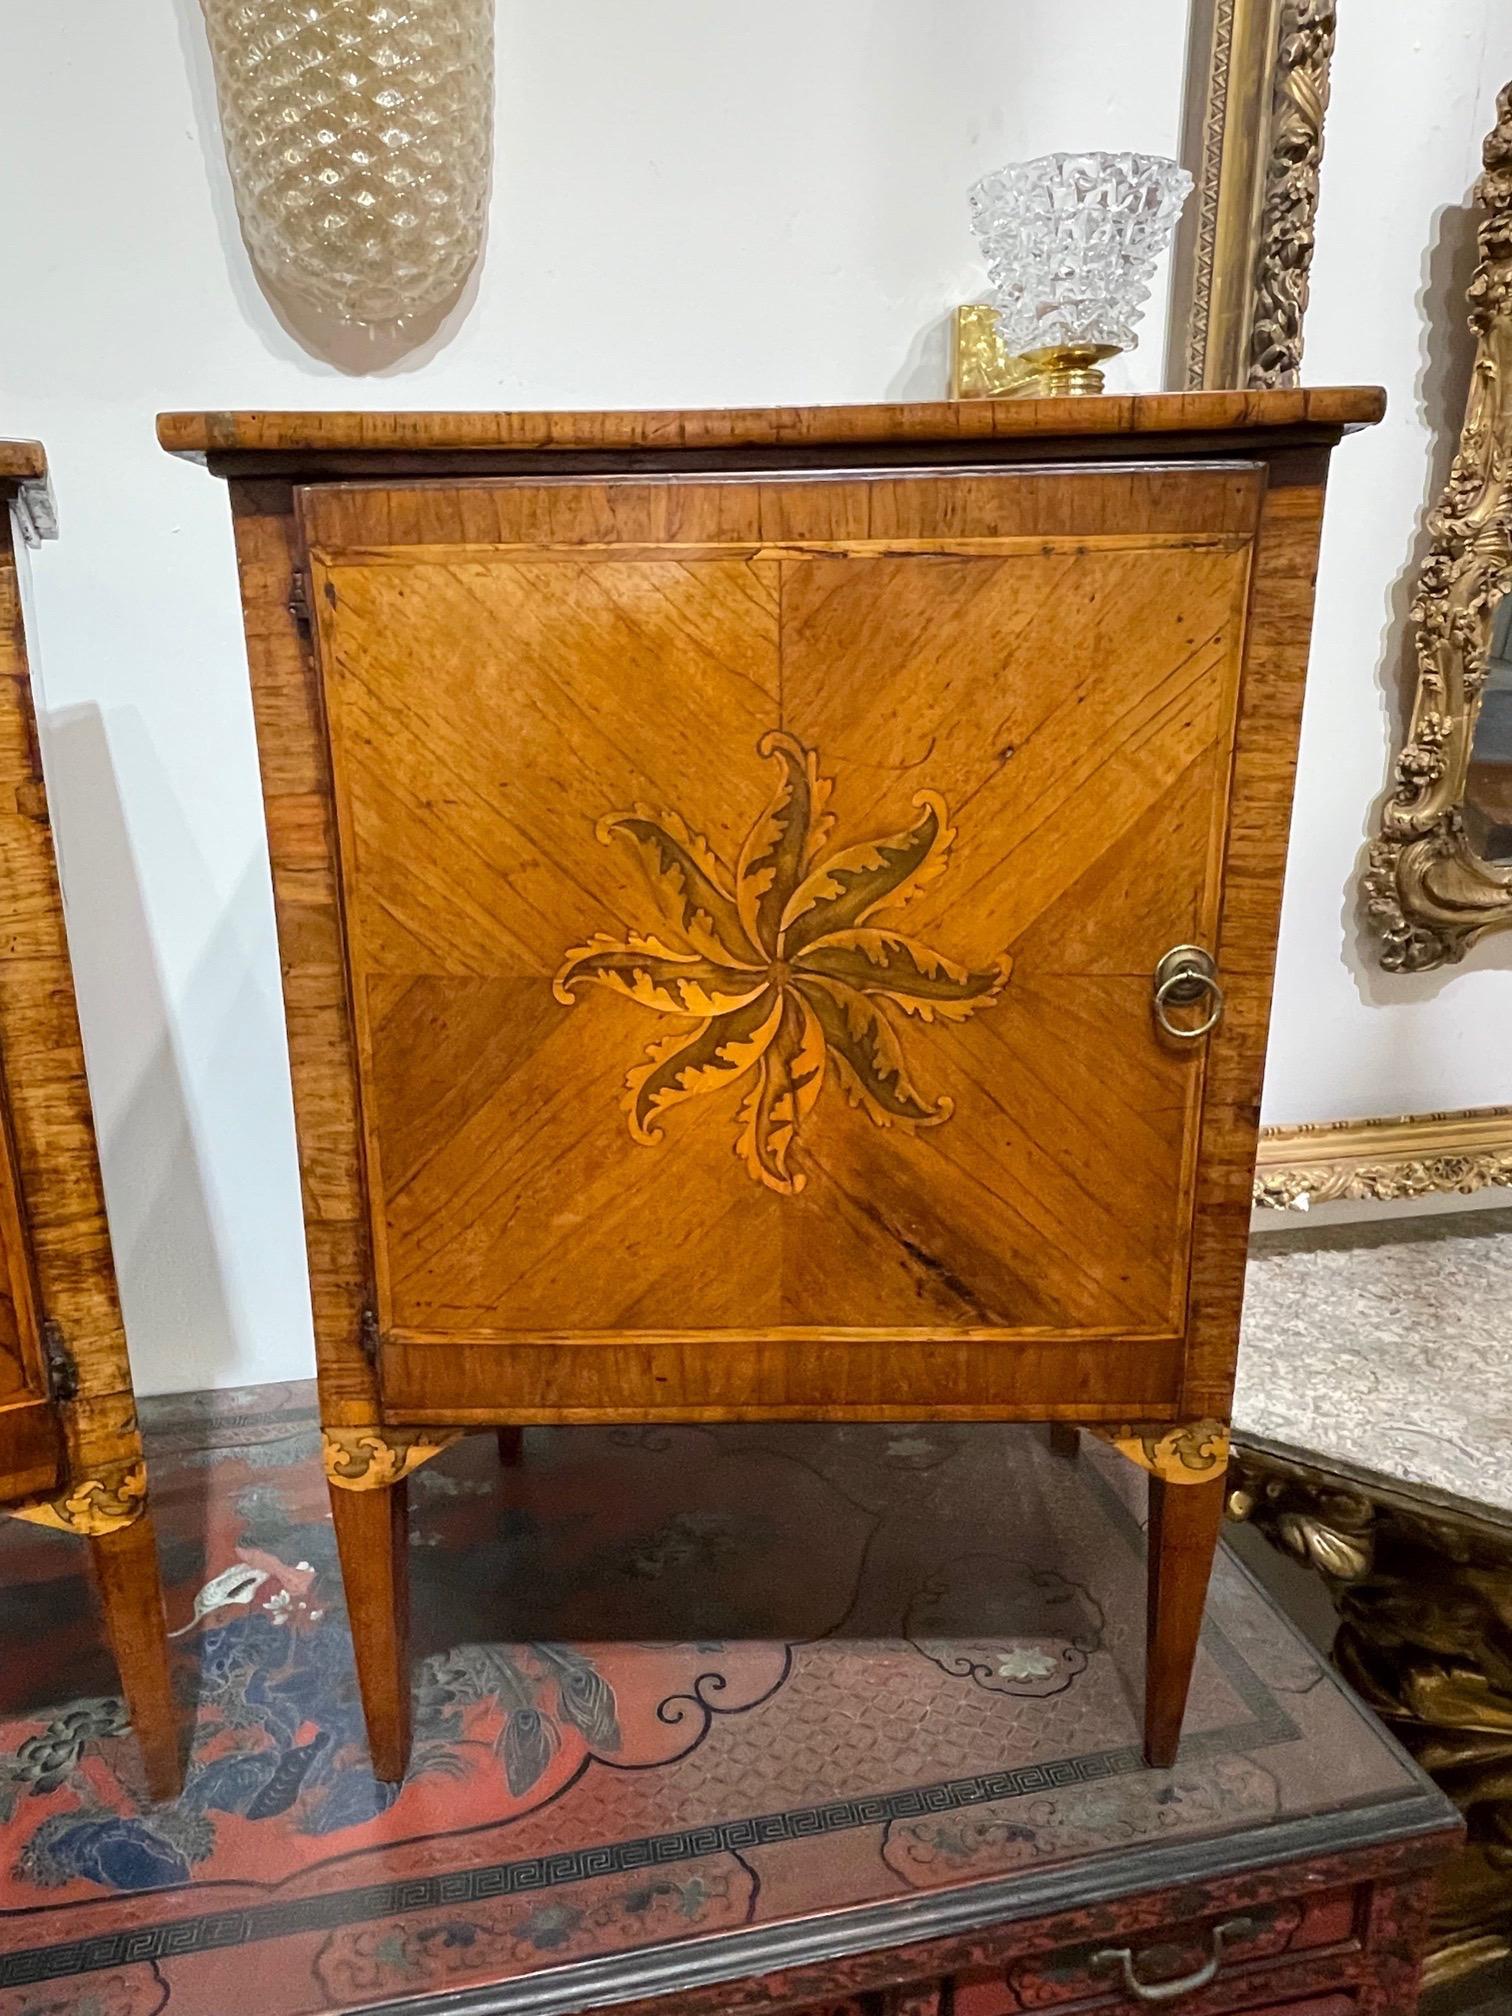 Lovely pair of 18th century Italian and mahogany inlaid commodes. Featuring a beautiful decorative pattern on the front of the cabinets. Just gorgeous!!.